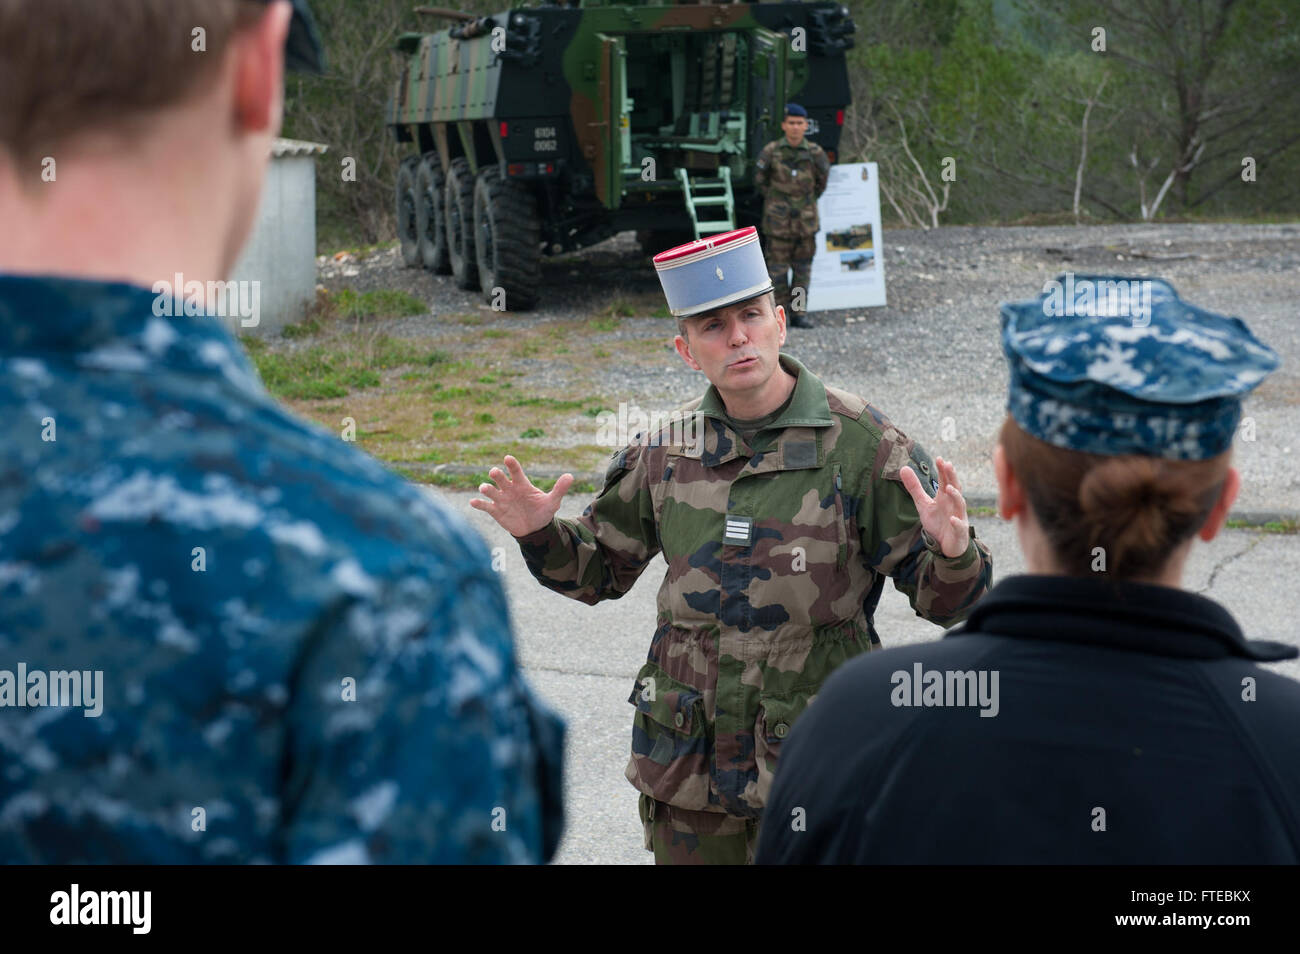 140311-N-WD757-073 MARSEILLE, France (March 11, 2014) – French Army Capt. Herve Martin, assigned to the Armée De Terre 4e Regiment De Dragons tank regiment, explains the unit’s military vehicles to Sailors assigned to the guided-missile destroyer USS Arleigh Burke (DDG 51) while the ship is on a scheduled port visit to Marseille, France. Arleigh Burke is on a scheduled deployment in support of maritime security operations and theater security cooperation efforts in the U.S. 6th Fleet area of operations. (U.S. Navy photo by Mass Communication Specialist 2nd Class Carlos M. Vazquez II/Released)  Stock Photo